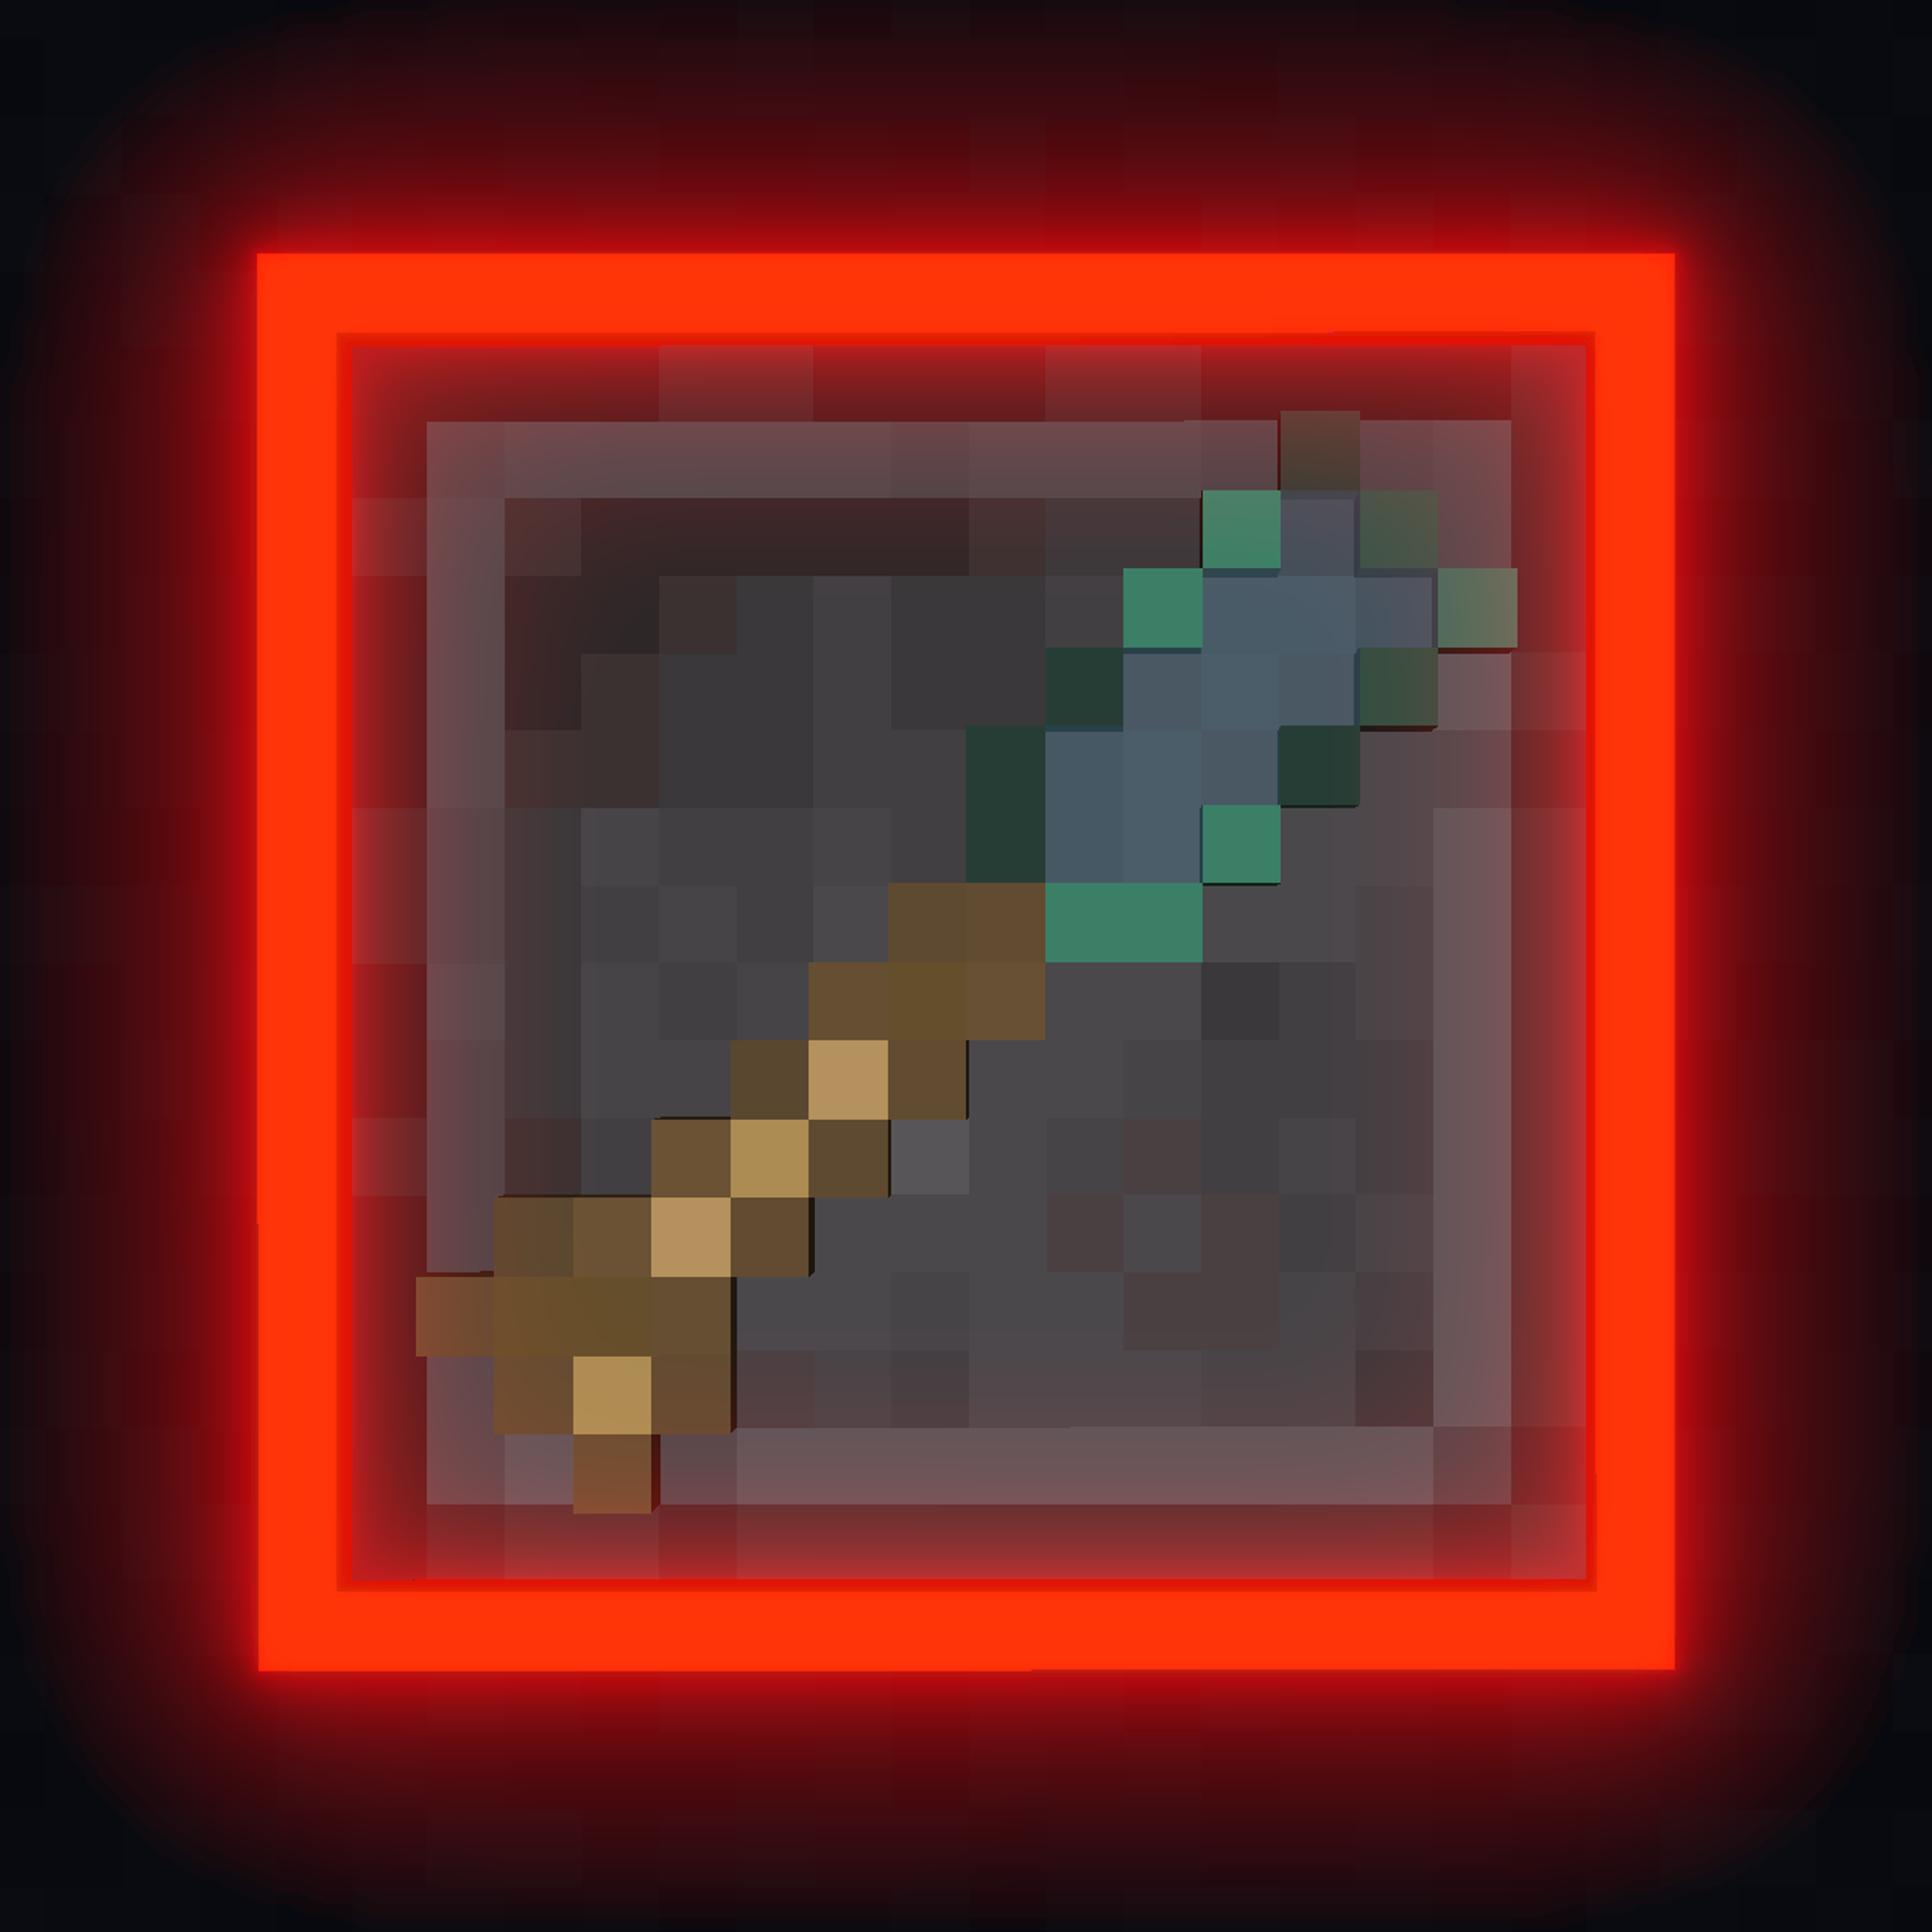 chisel and bits mod minecraft 1.16